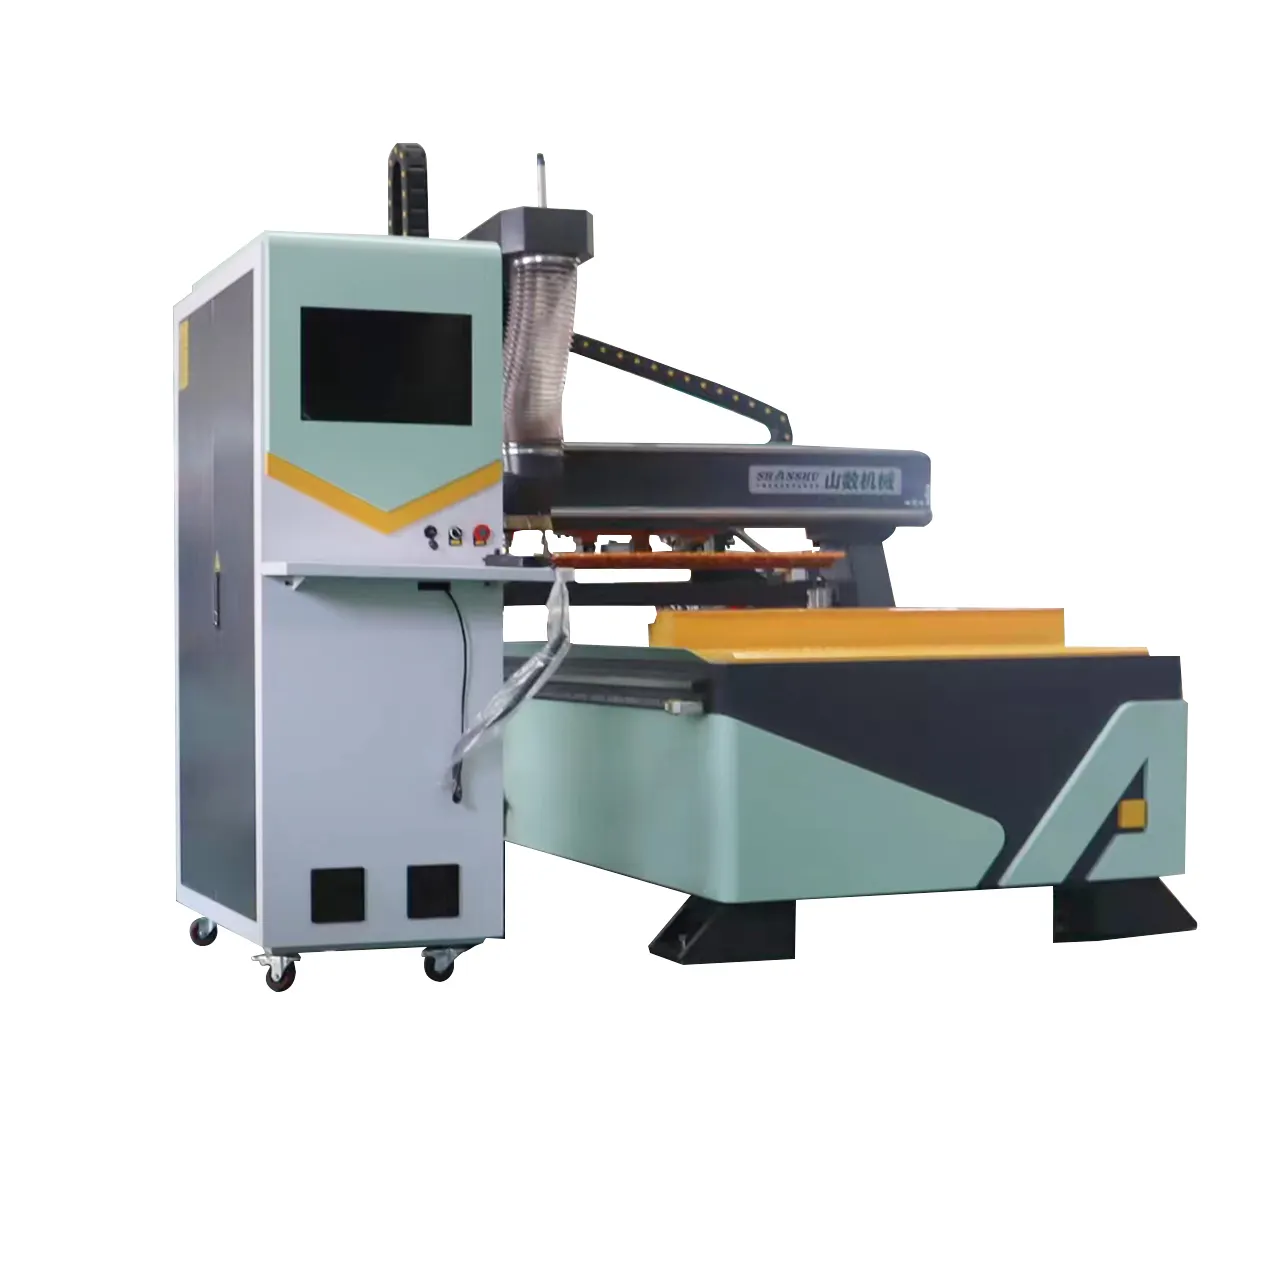 Cnc router 1325 engraving machine for milling wood holes cnc router wood cutting machine atc cnc wood router